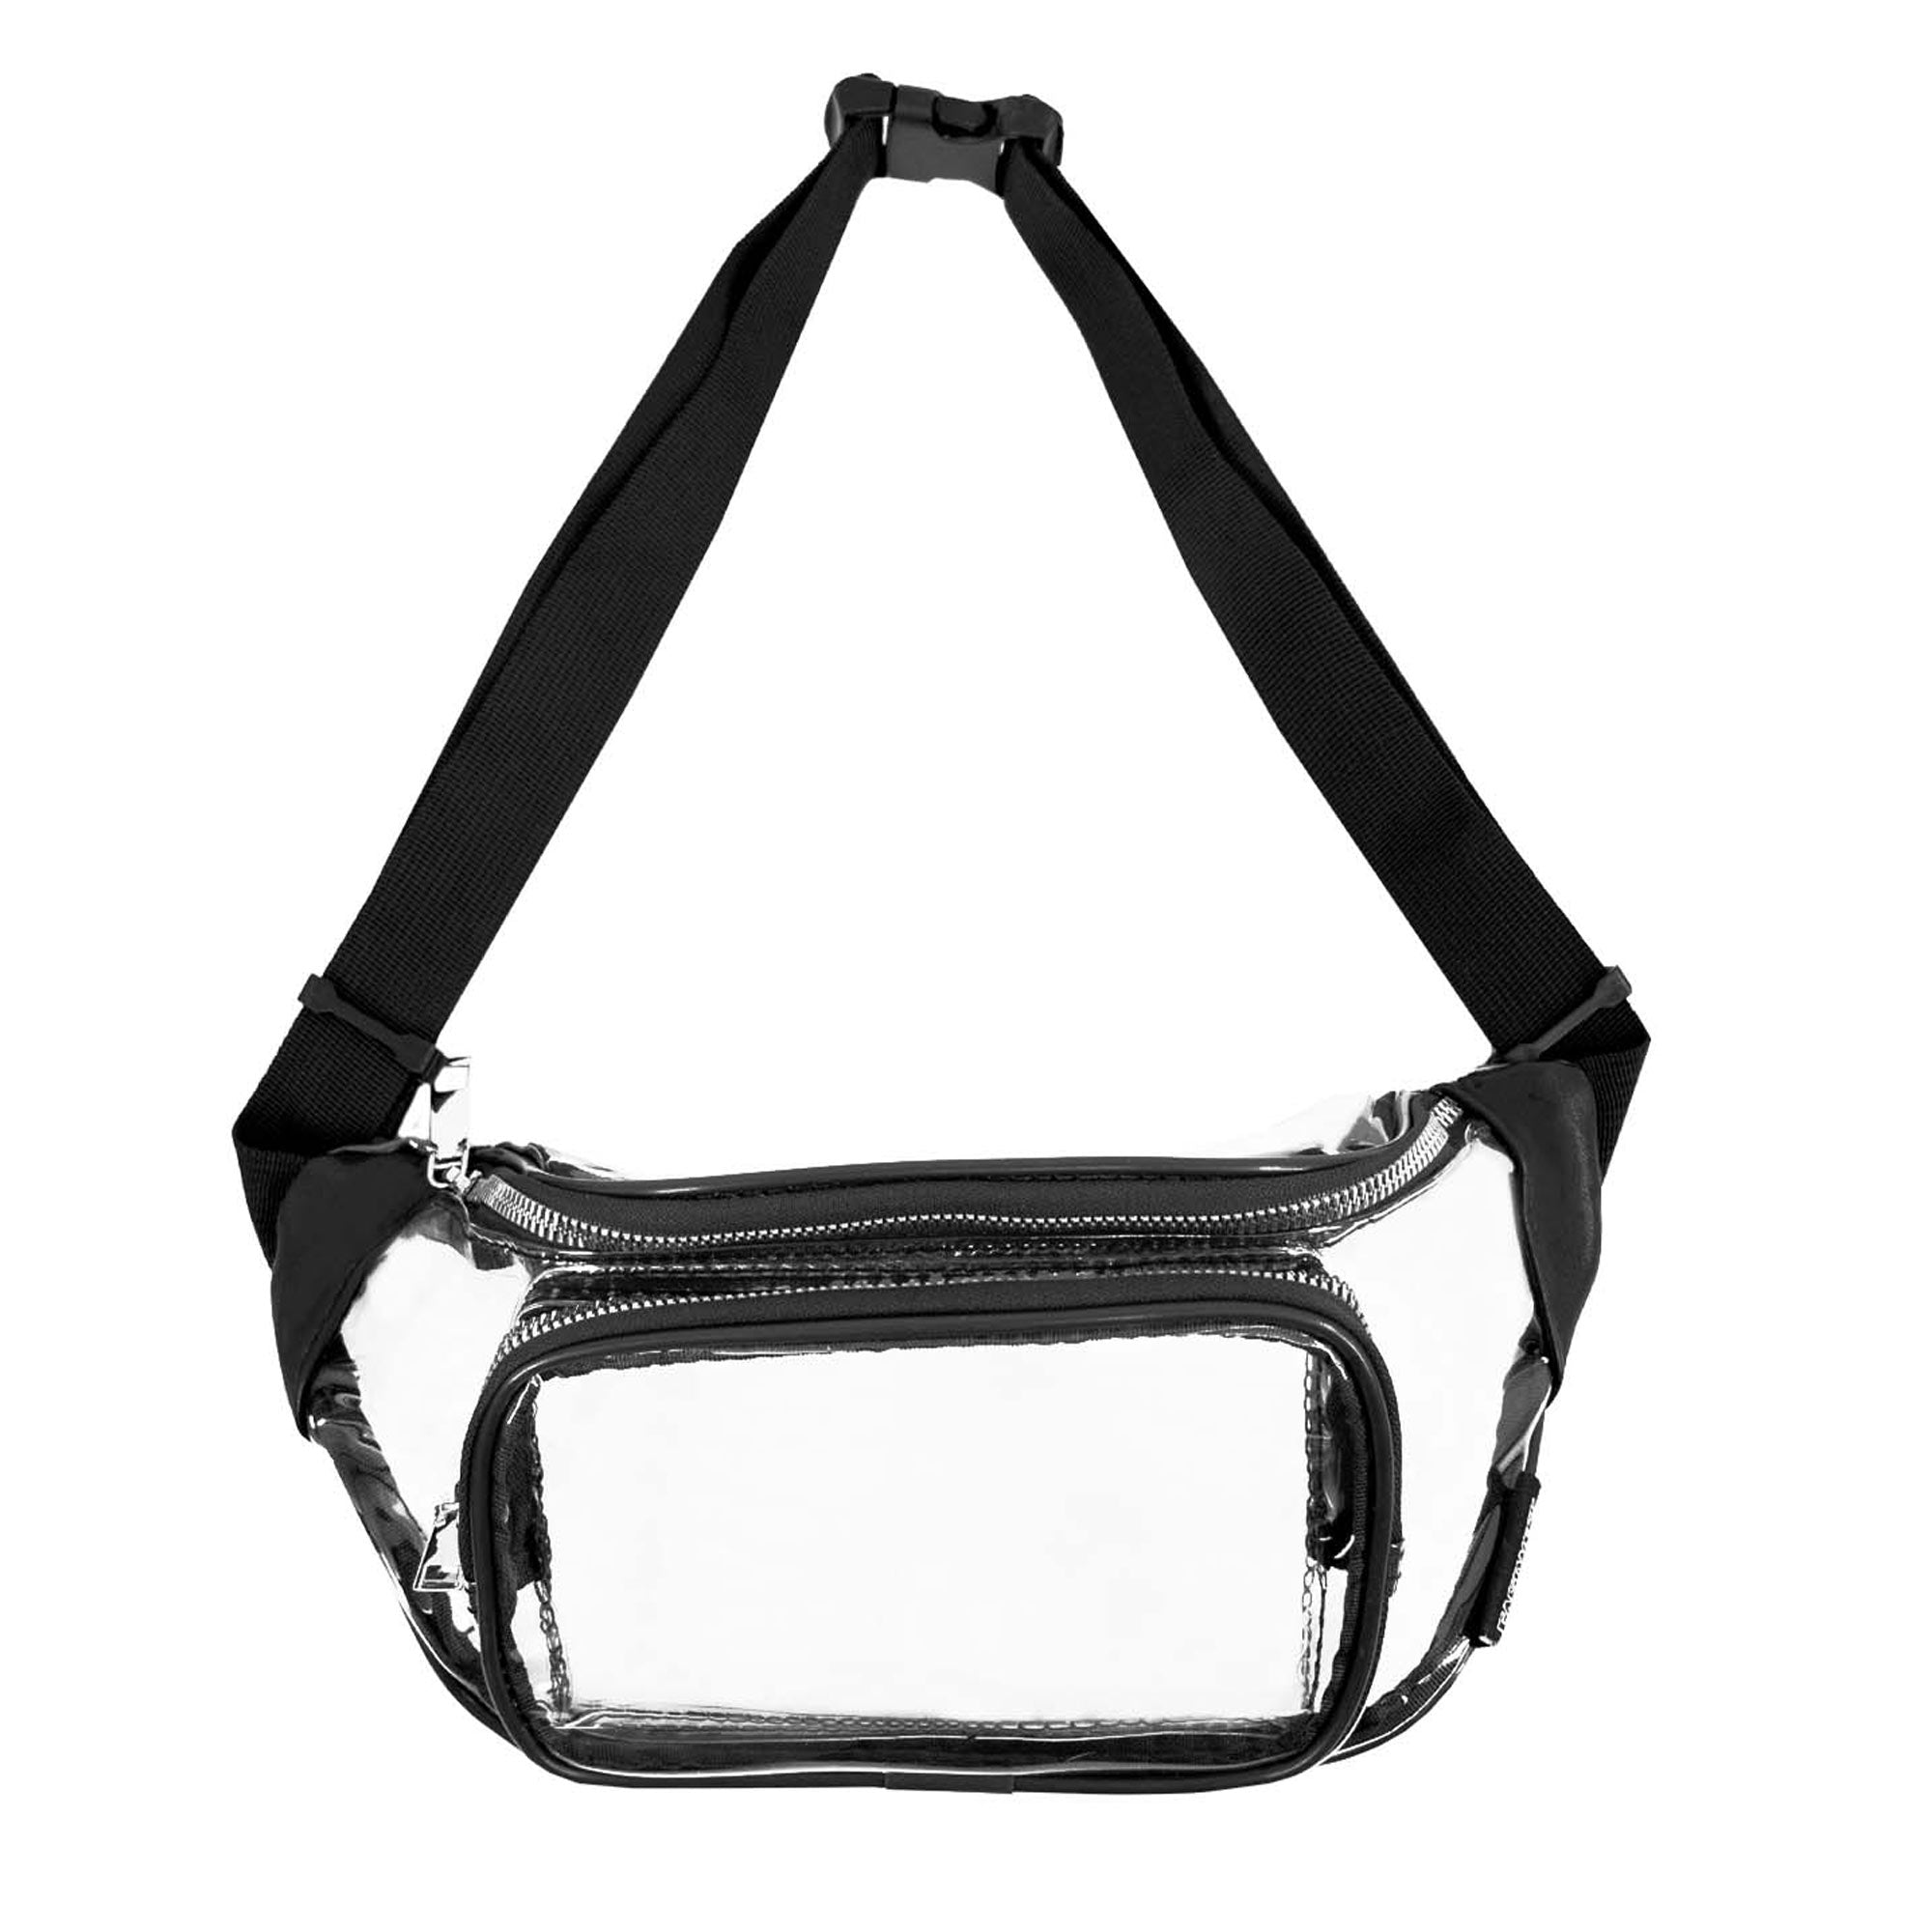 Clearance Sale  Unisex Wholesale Clear Fanny Pack Waist Bag in Black